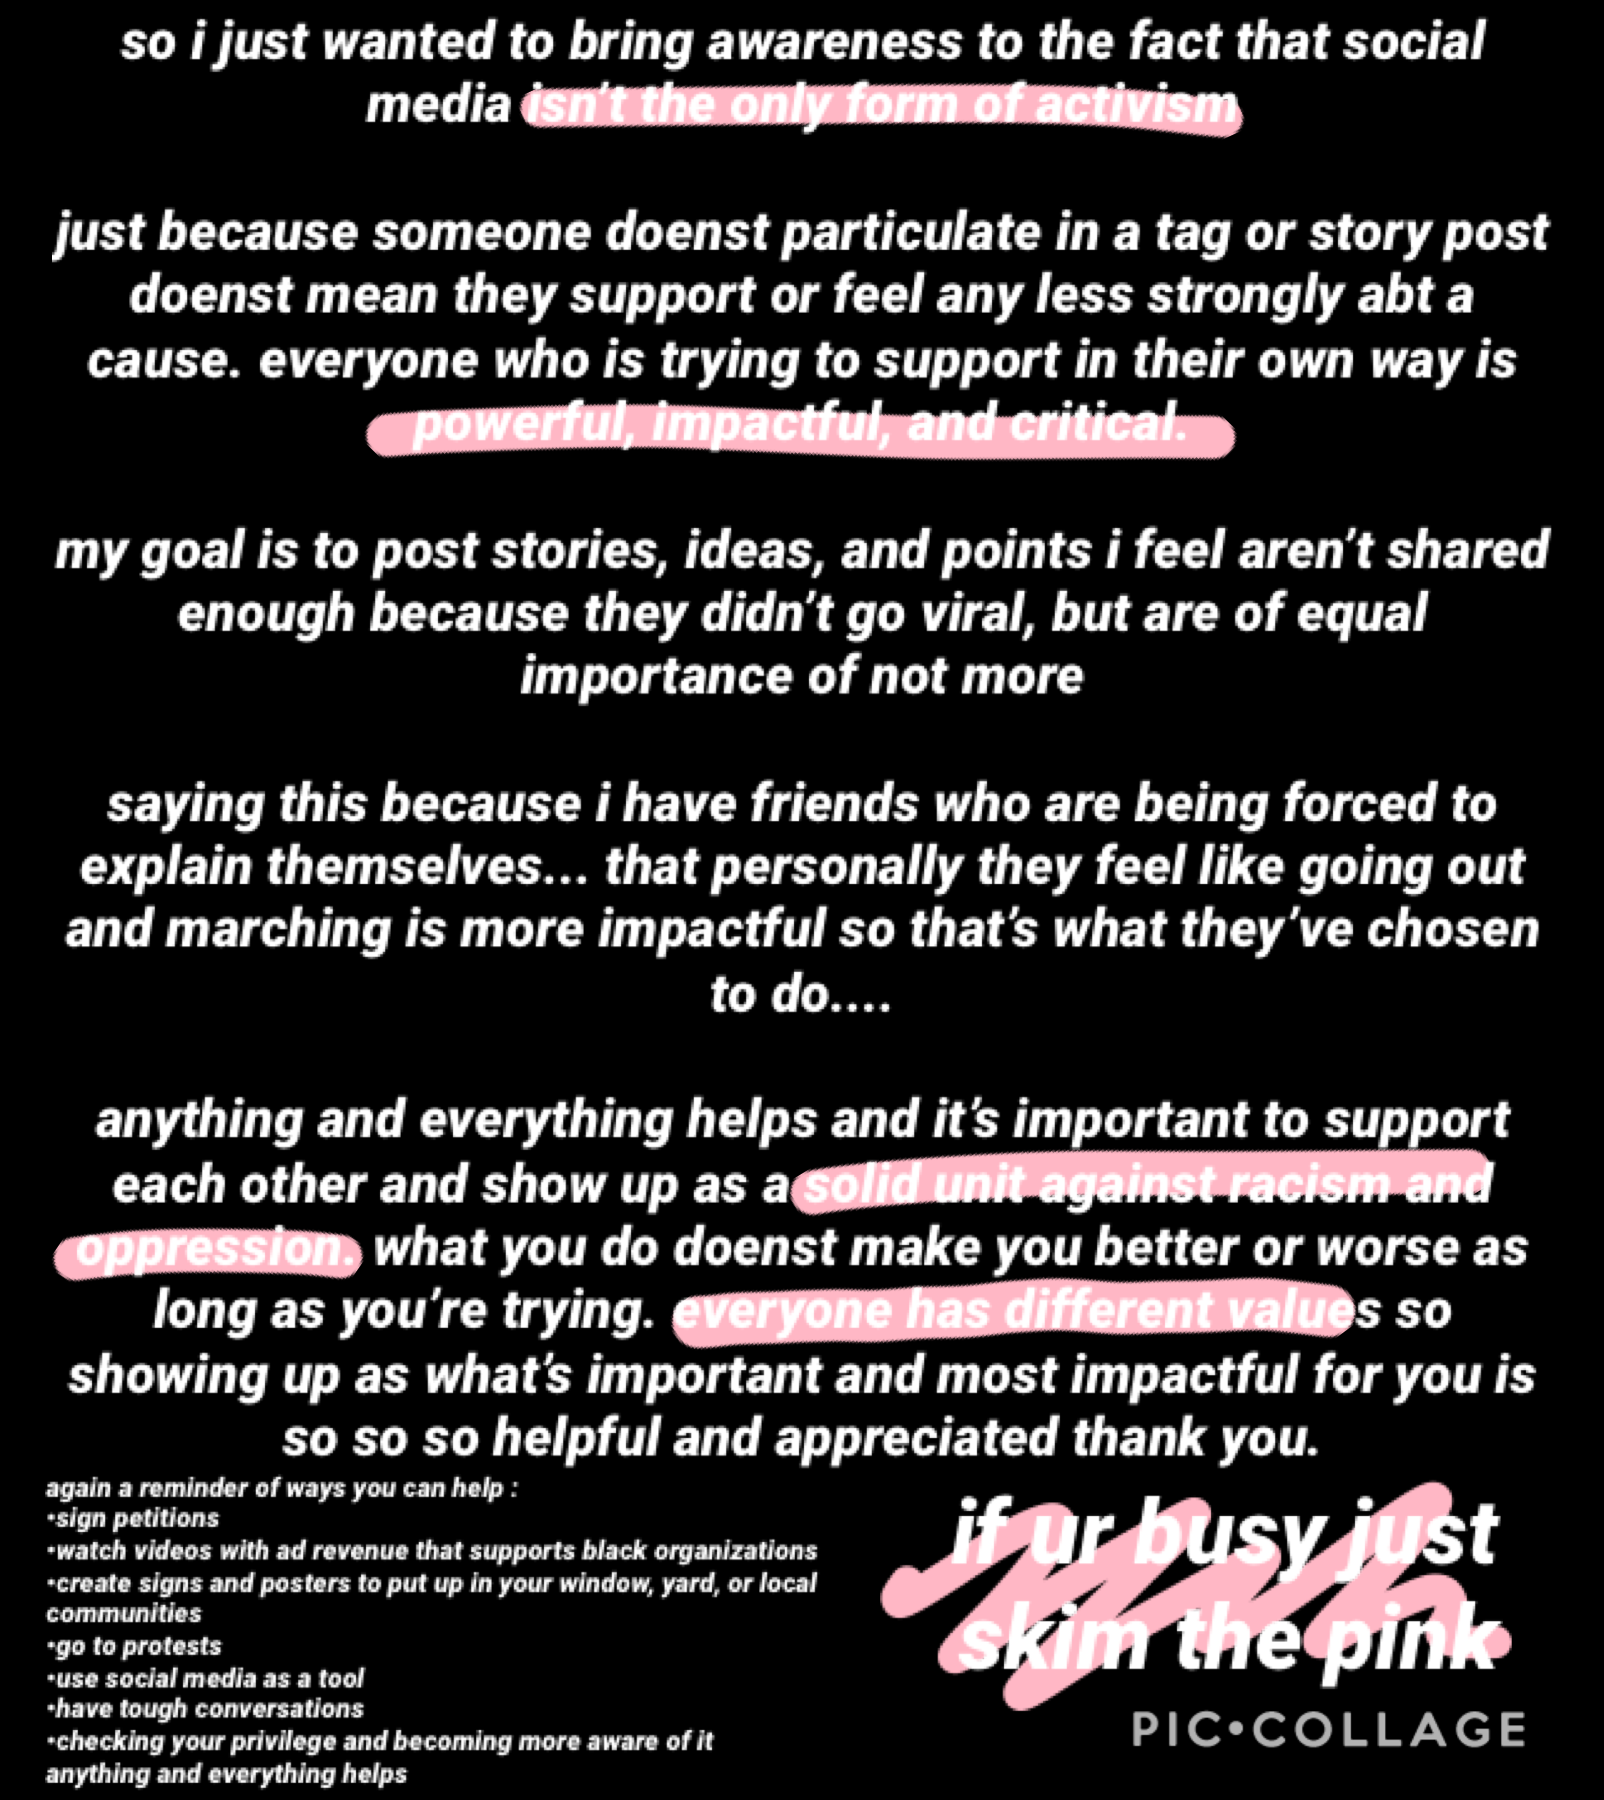 reposting✊🏻✊🏼✊🏽✊🏾✊🏿

if anyone disagrees w anything i’ve said please let me know

i think it’s important to have conversations that involve people who don’t agree

if those never happens nothing changes

i unapologetically stand by that statement 